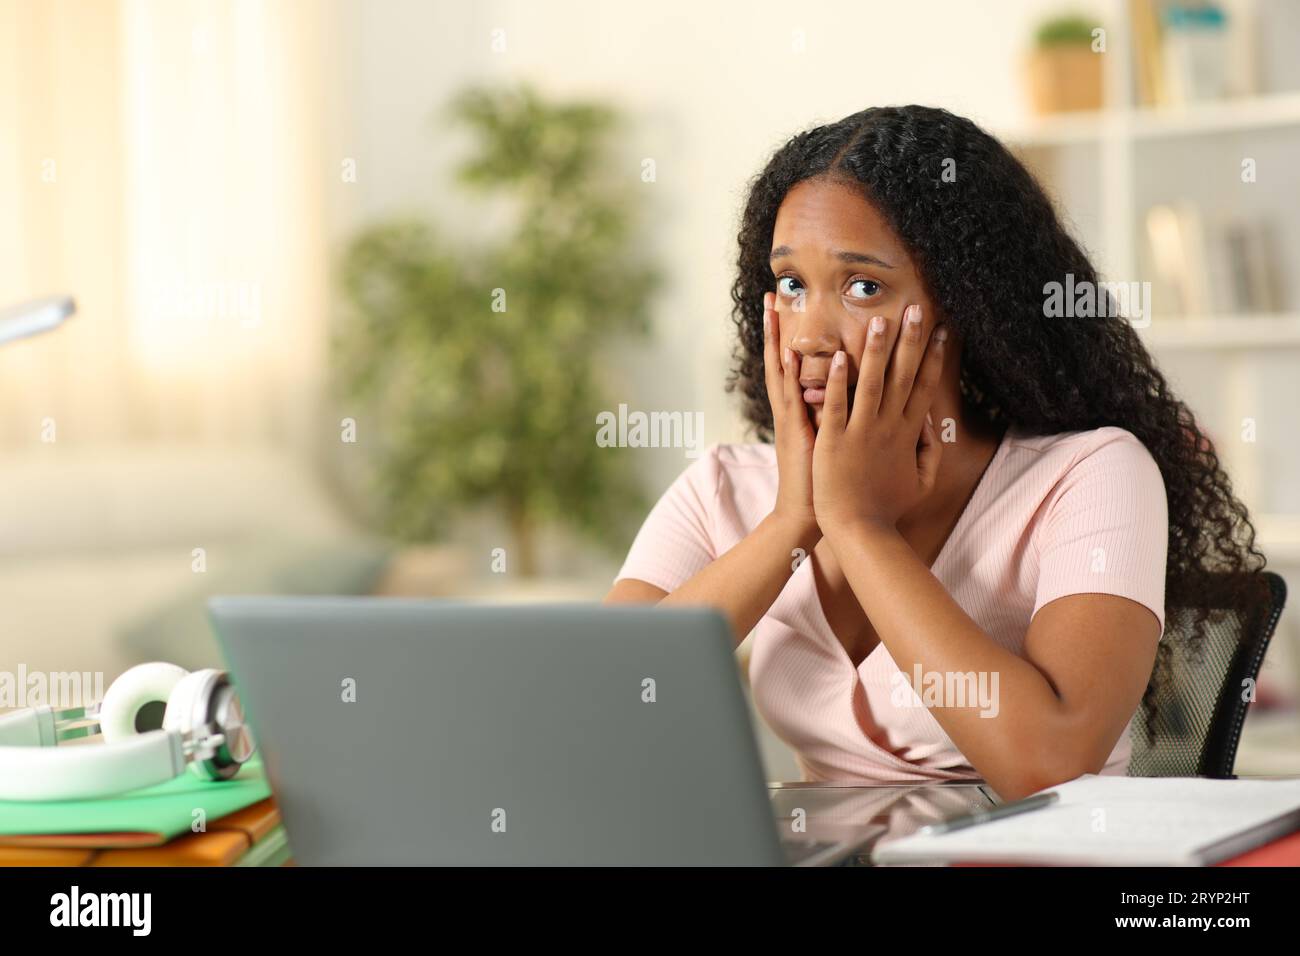 Concerned black student e-learning looking at you complaining at home Stock Photo